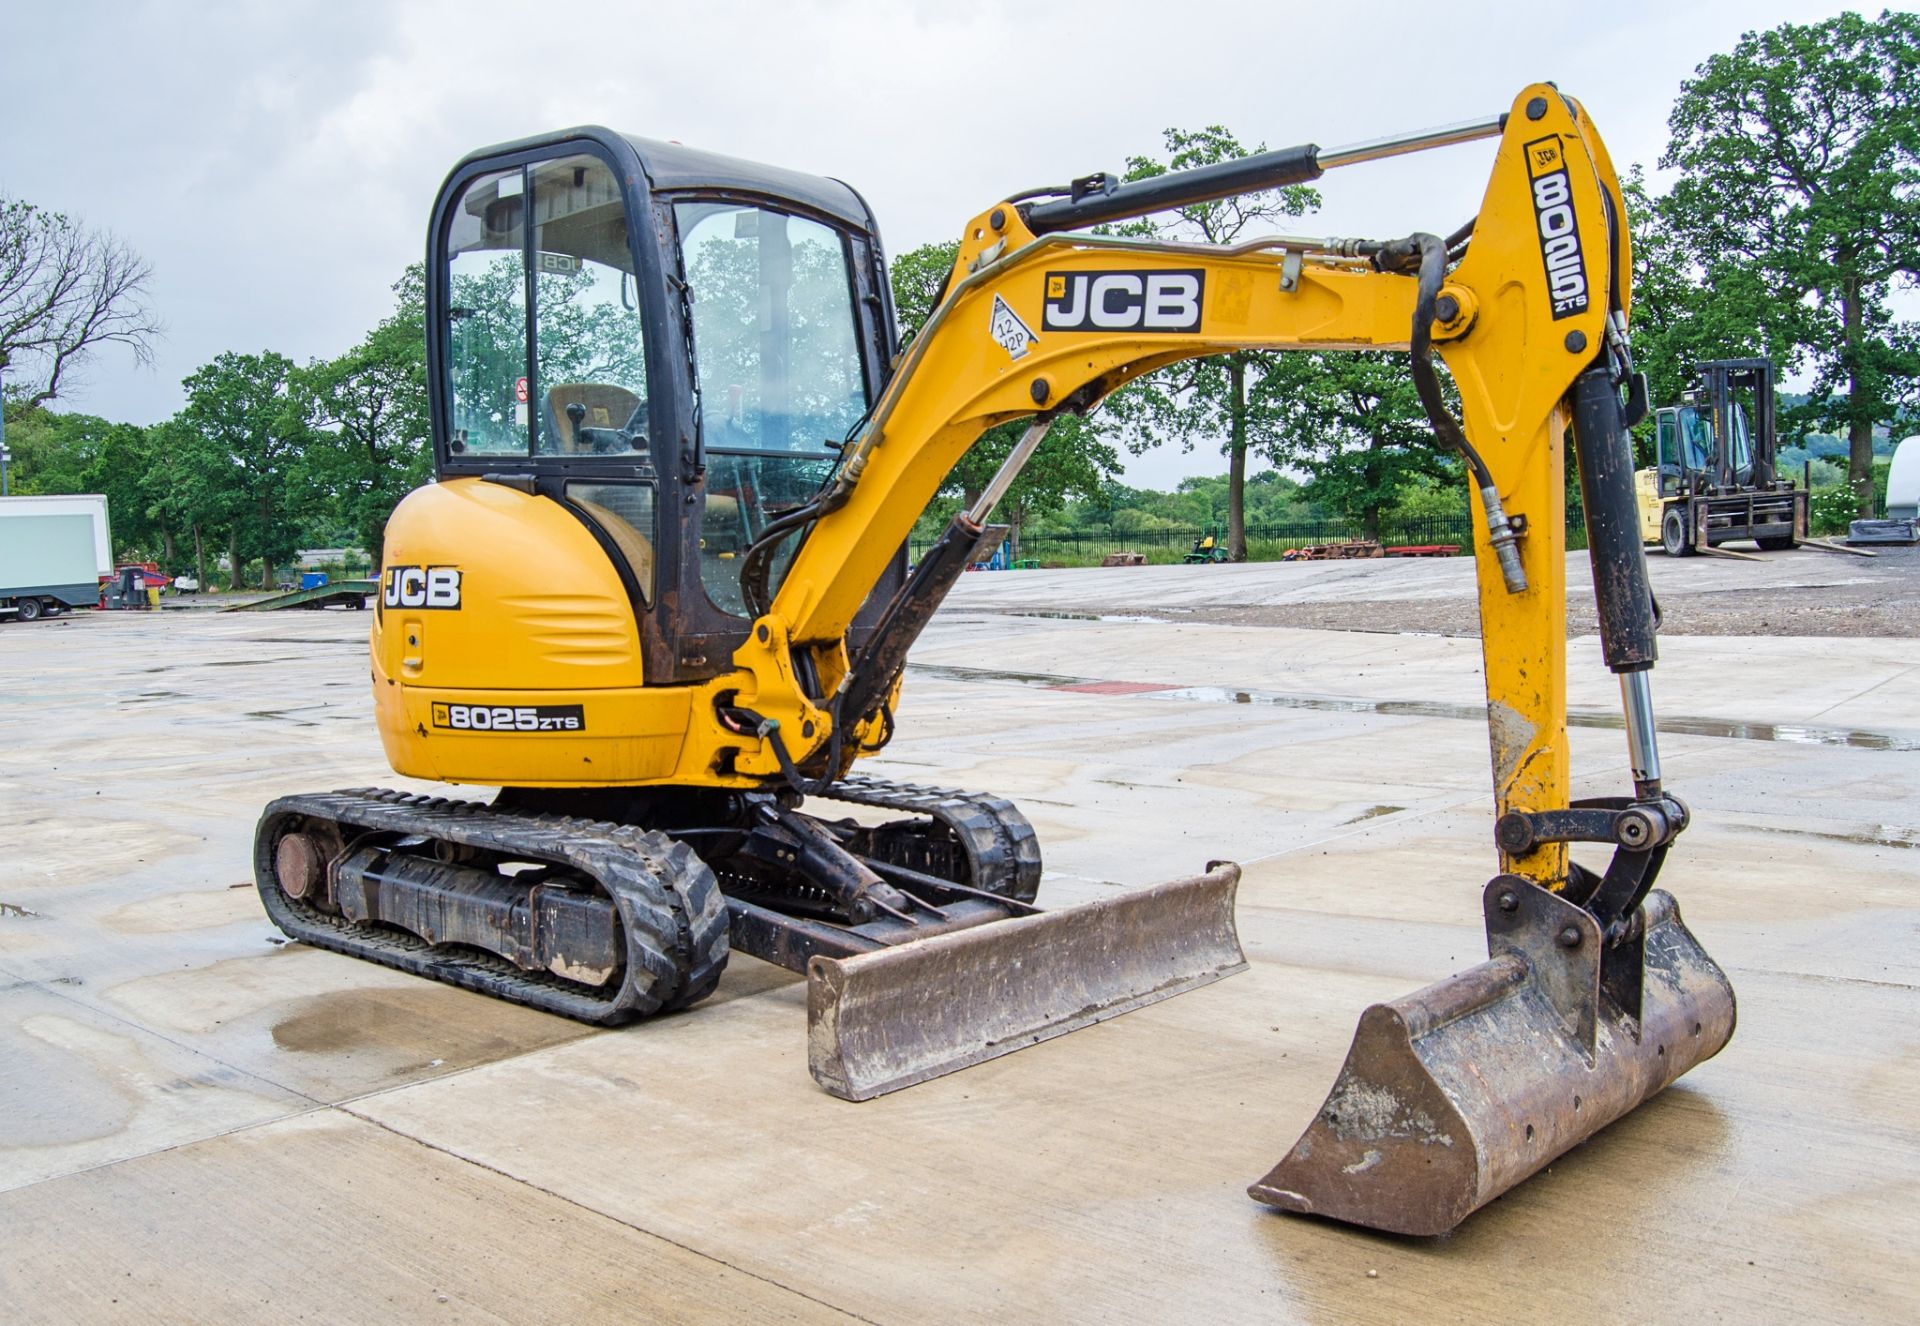 JCB 8025 ZTS 2.5 tonne zero tail swing rubber tracked mini excavator Year: 2013 S/N: 2226068 - Image 2 of 25